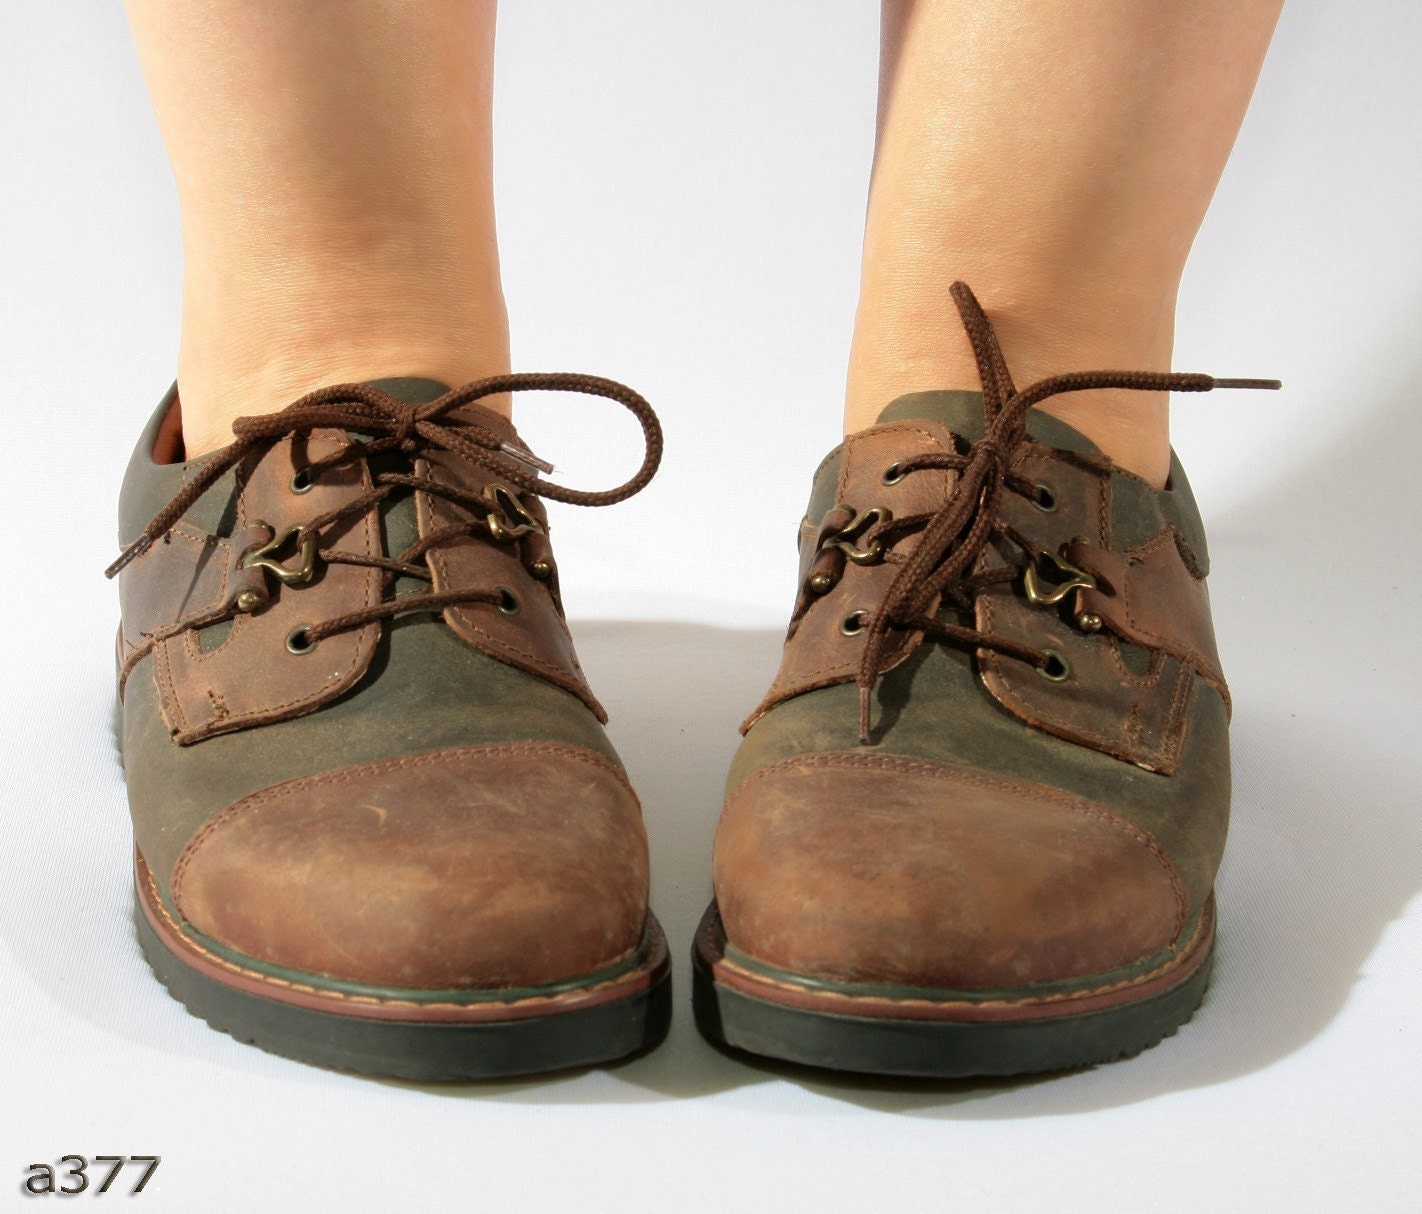 Vintage casual green and brown leather TOMBOY style OXFORDS, size 8.5, EUR 39